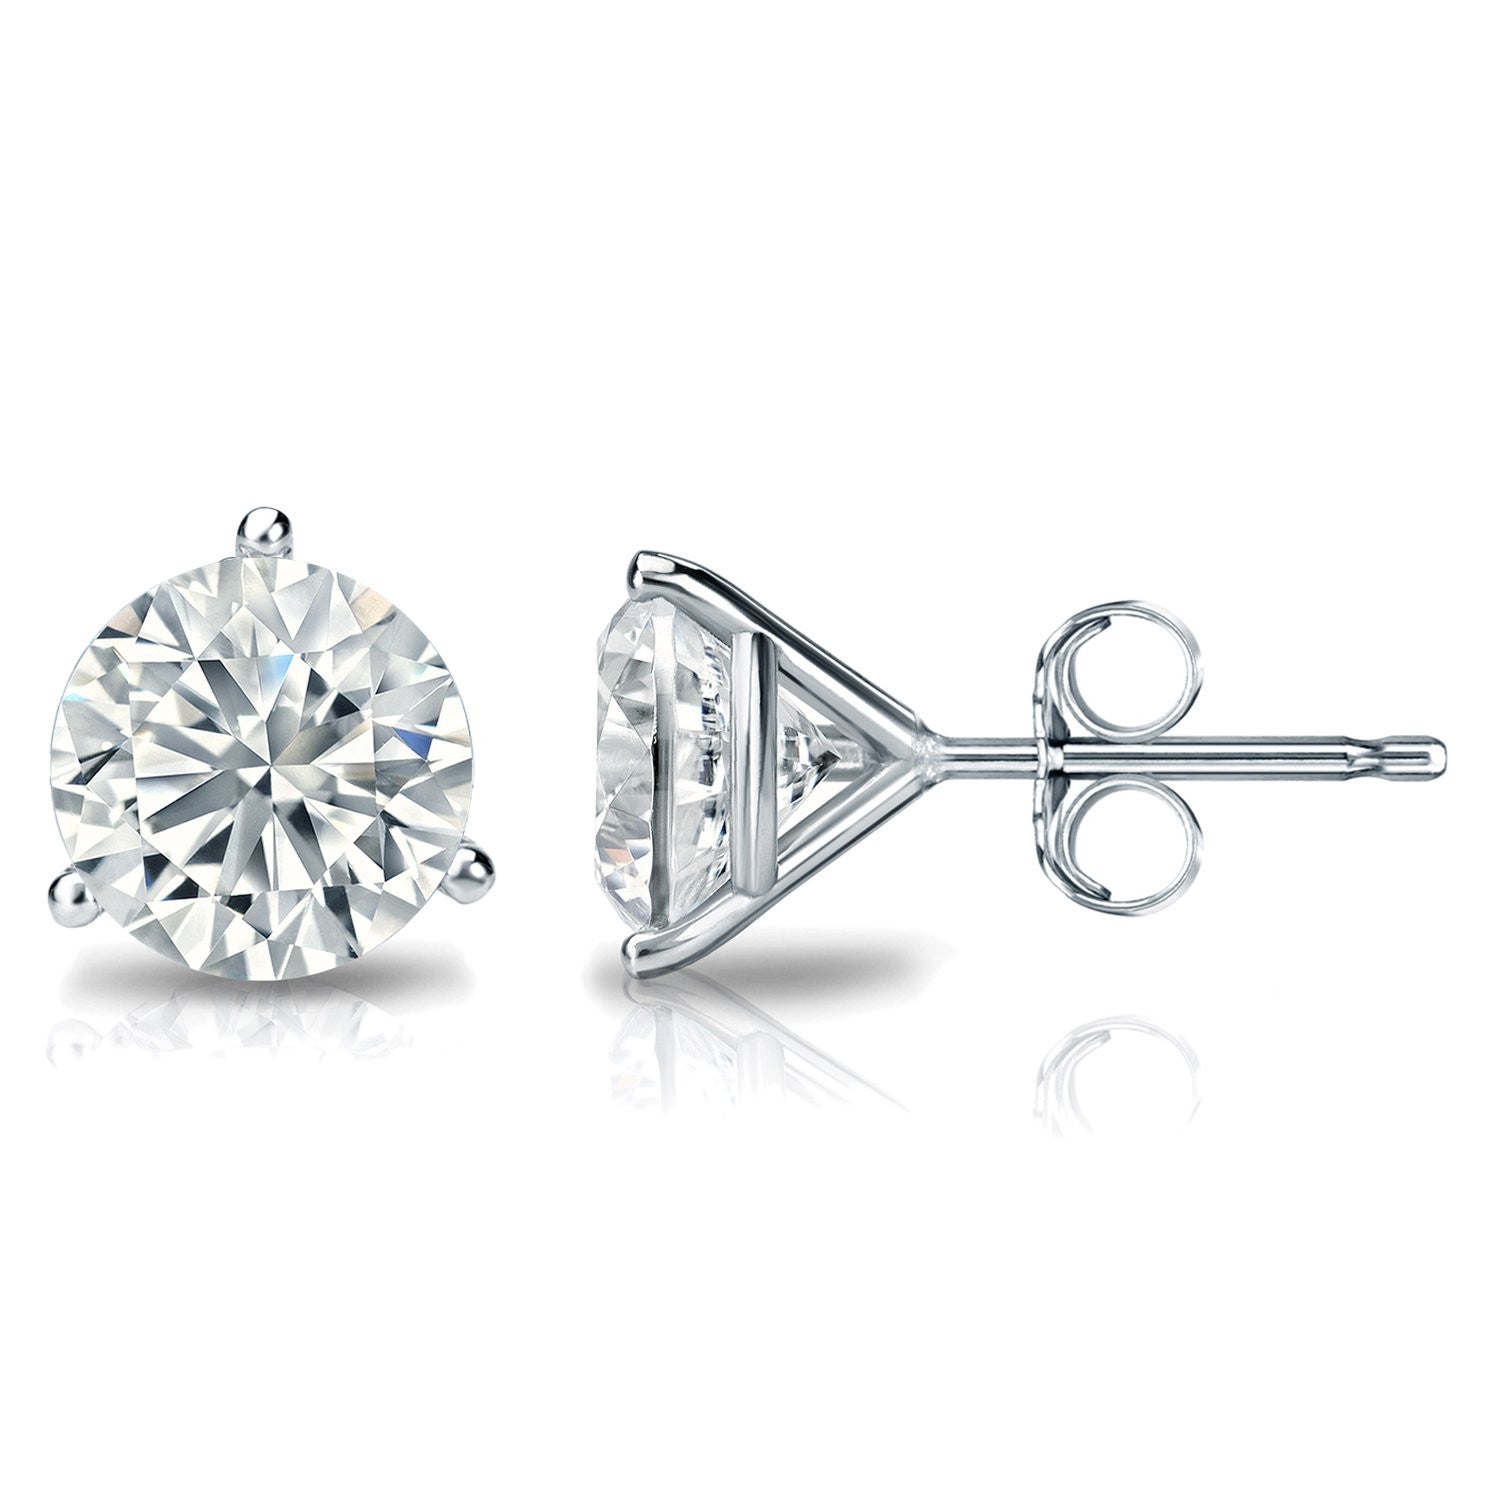 1/3 Carat Round 14K White Gold 3 Prong Martini Set Diamond Solitaire Stud Earrings (Classic Quality)